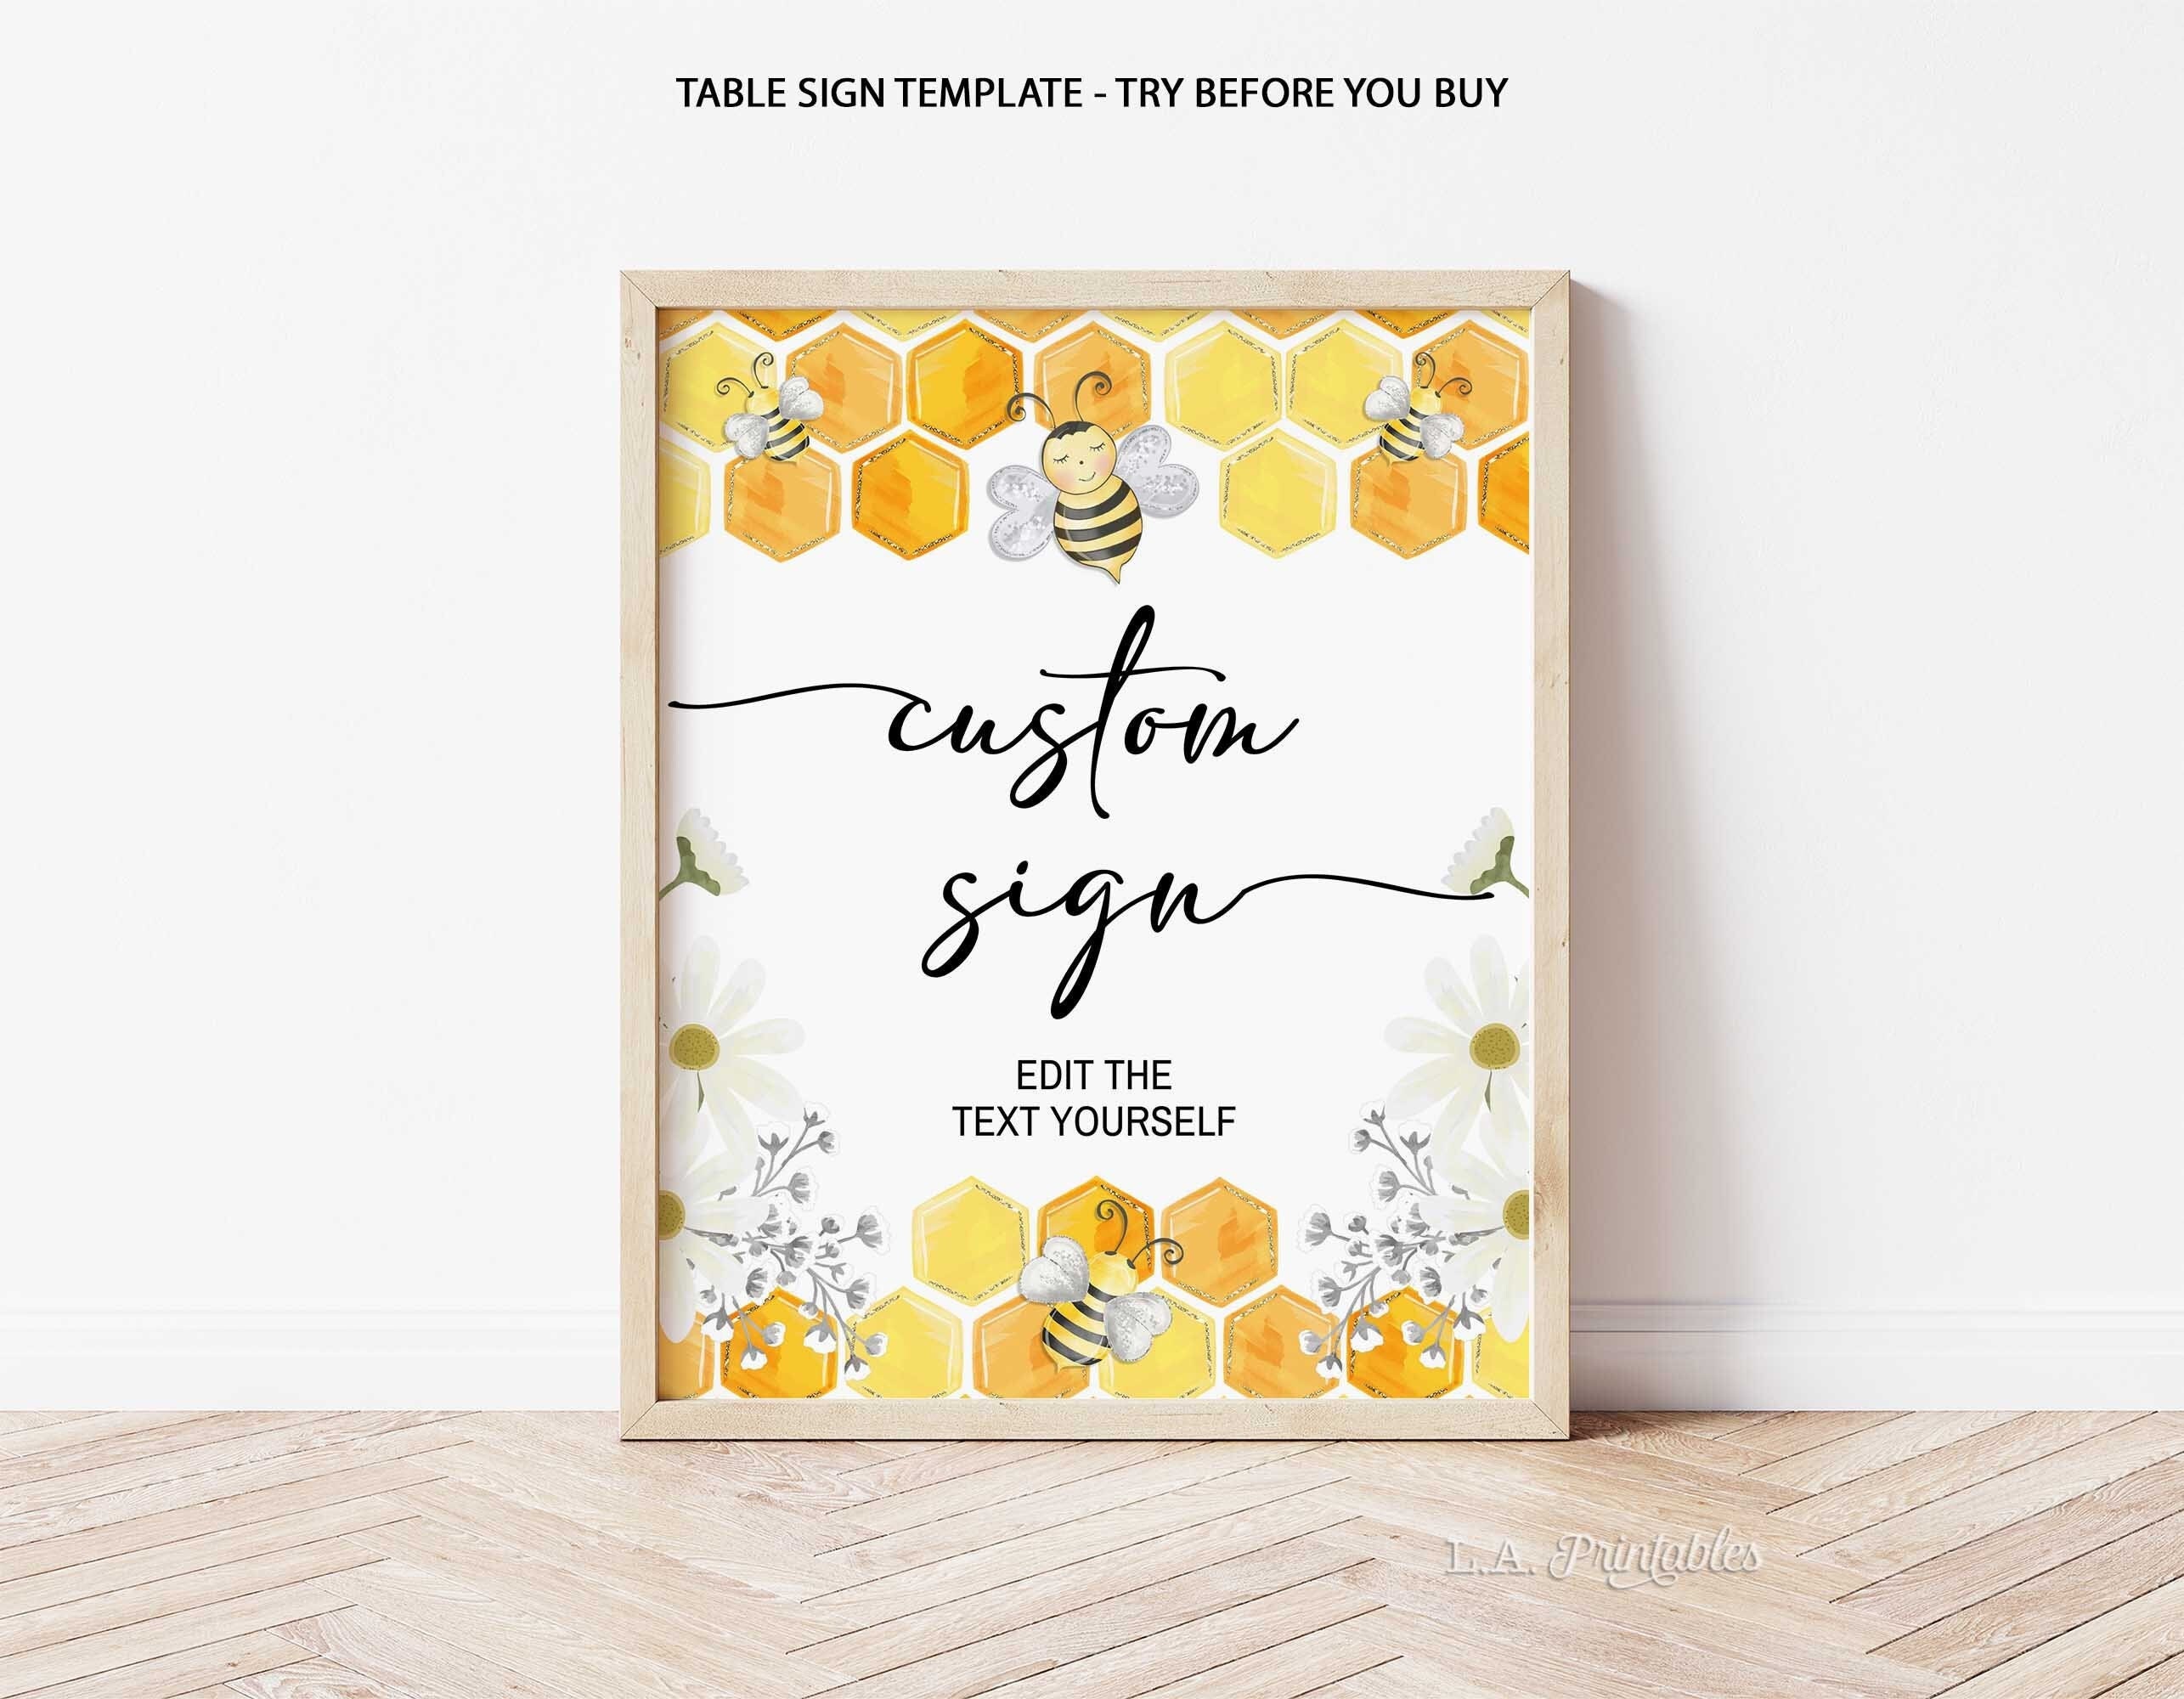 Editable Bee Party Decorations Honey Bee Package Birthday Sweet to Bee One  Bundle Party Package Template Digital Instant Download BEE013 -  Finland